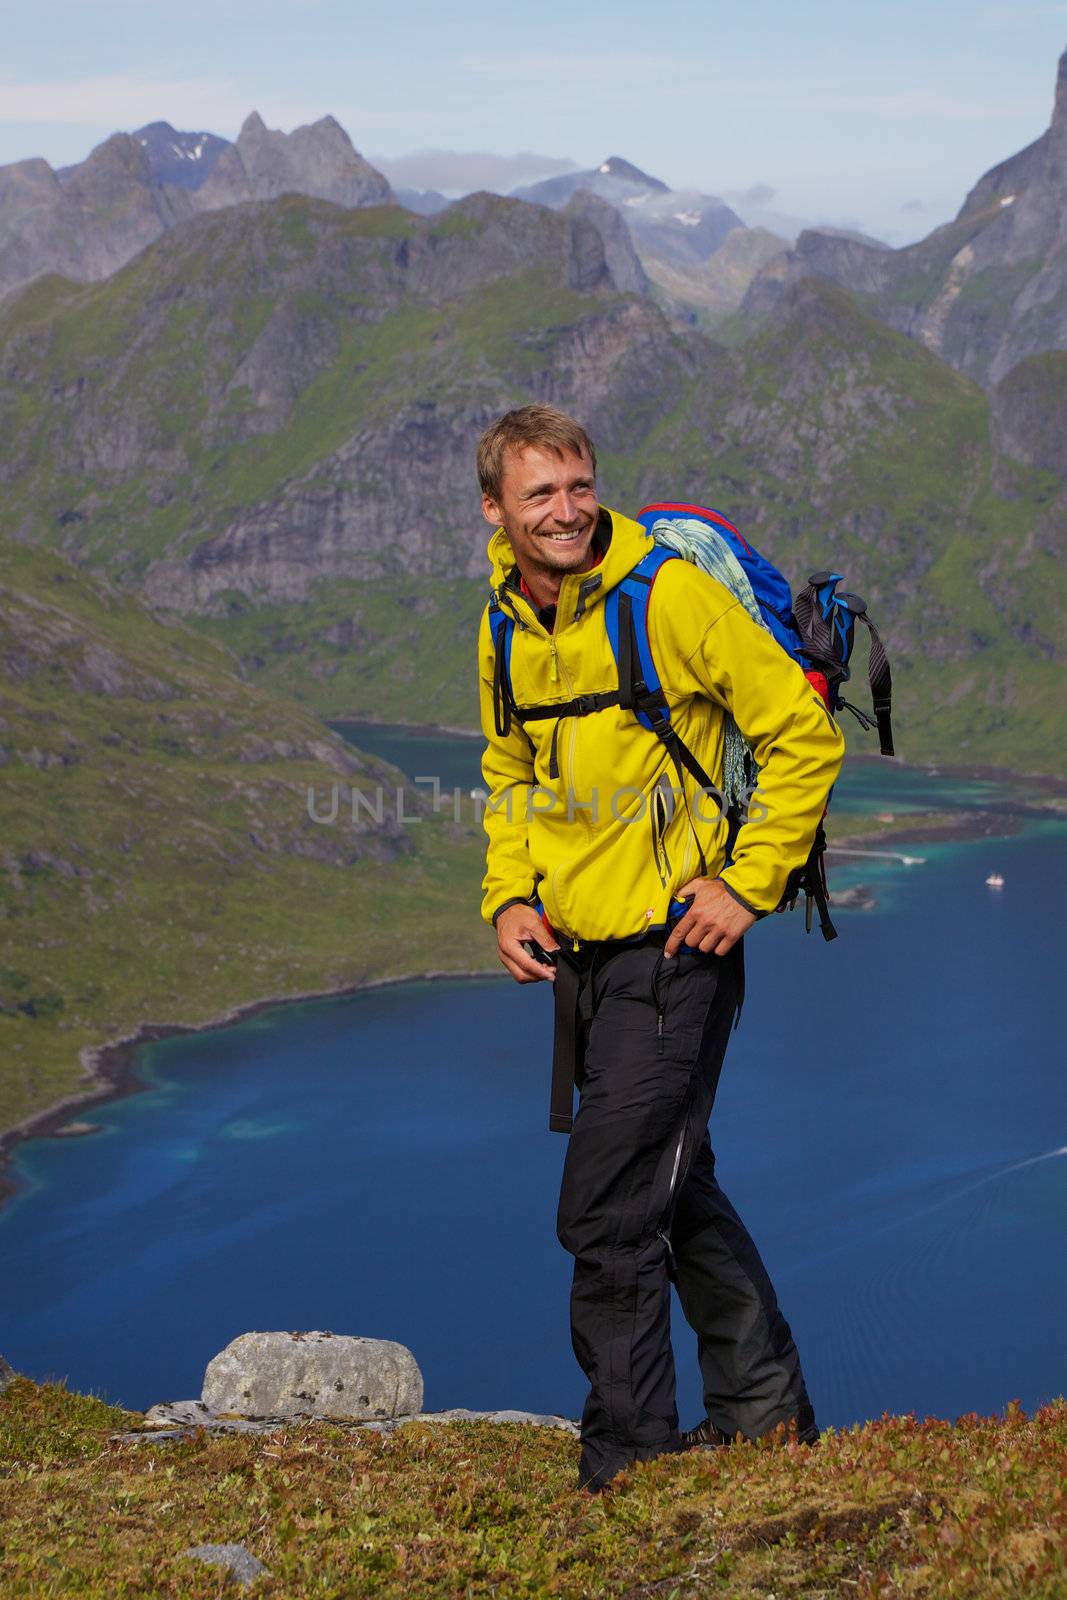 Young smiling active man with backpack hiking on Lofoten islands in Norway on sunny day high above fjord